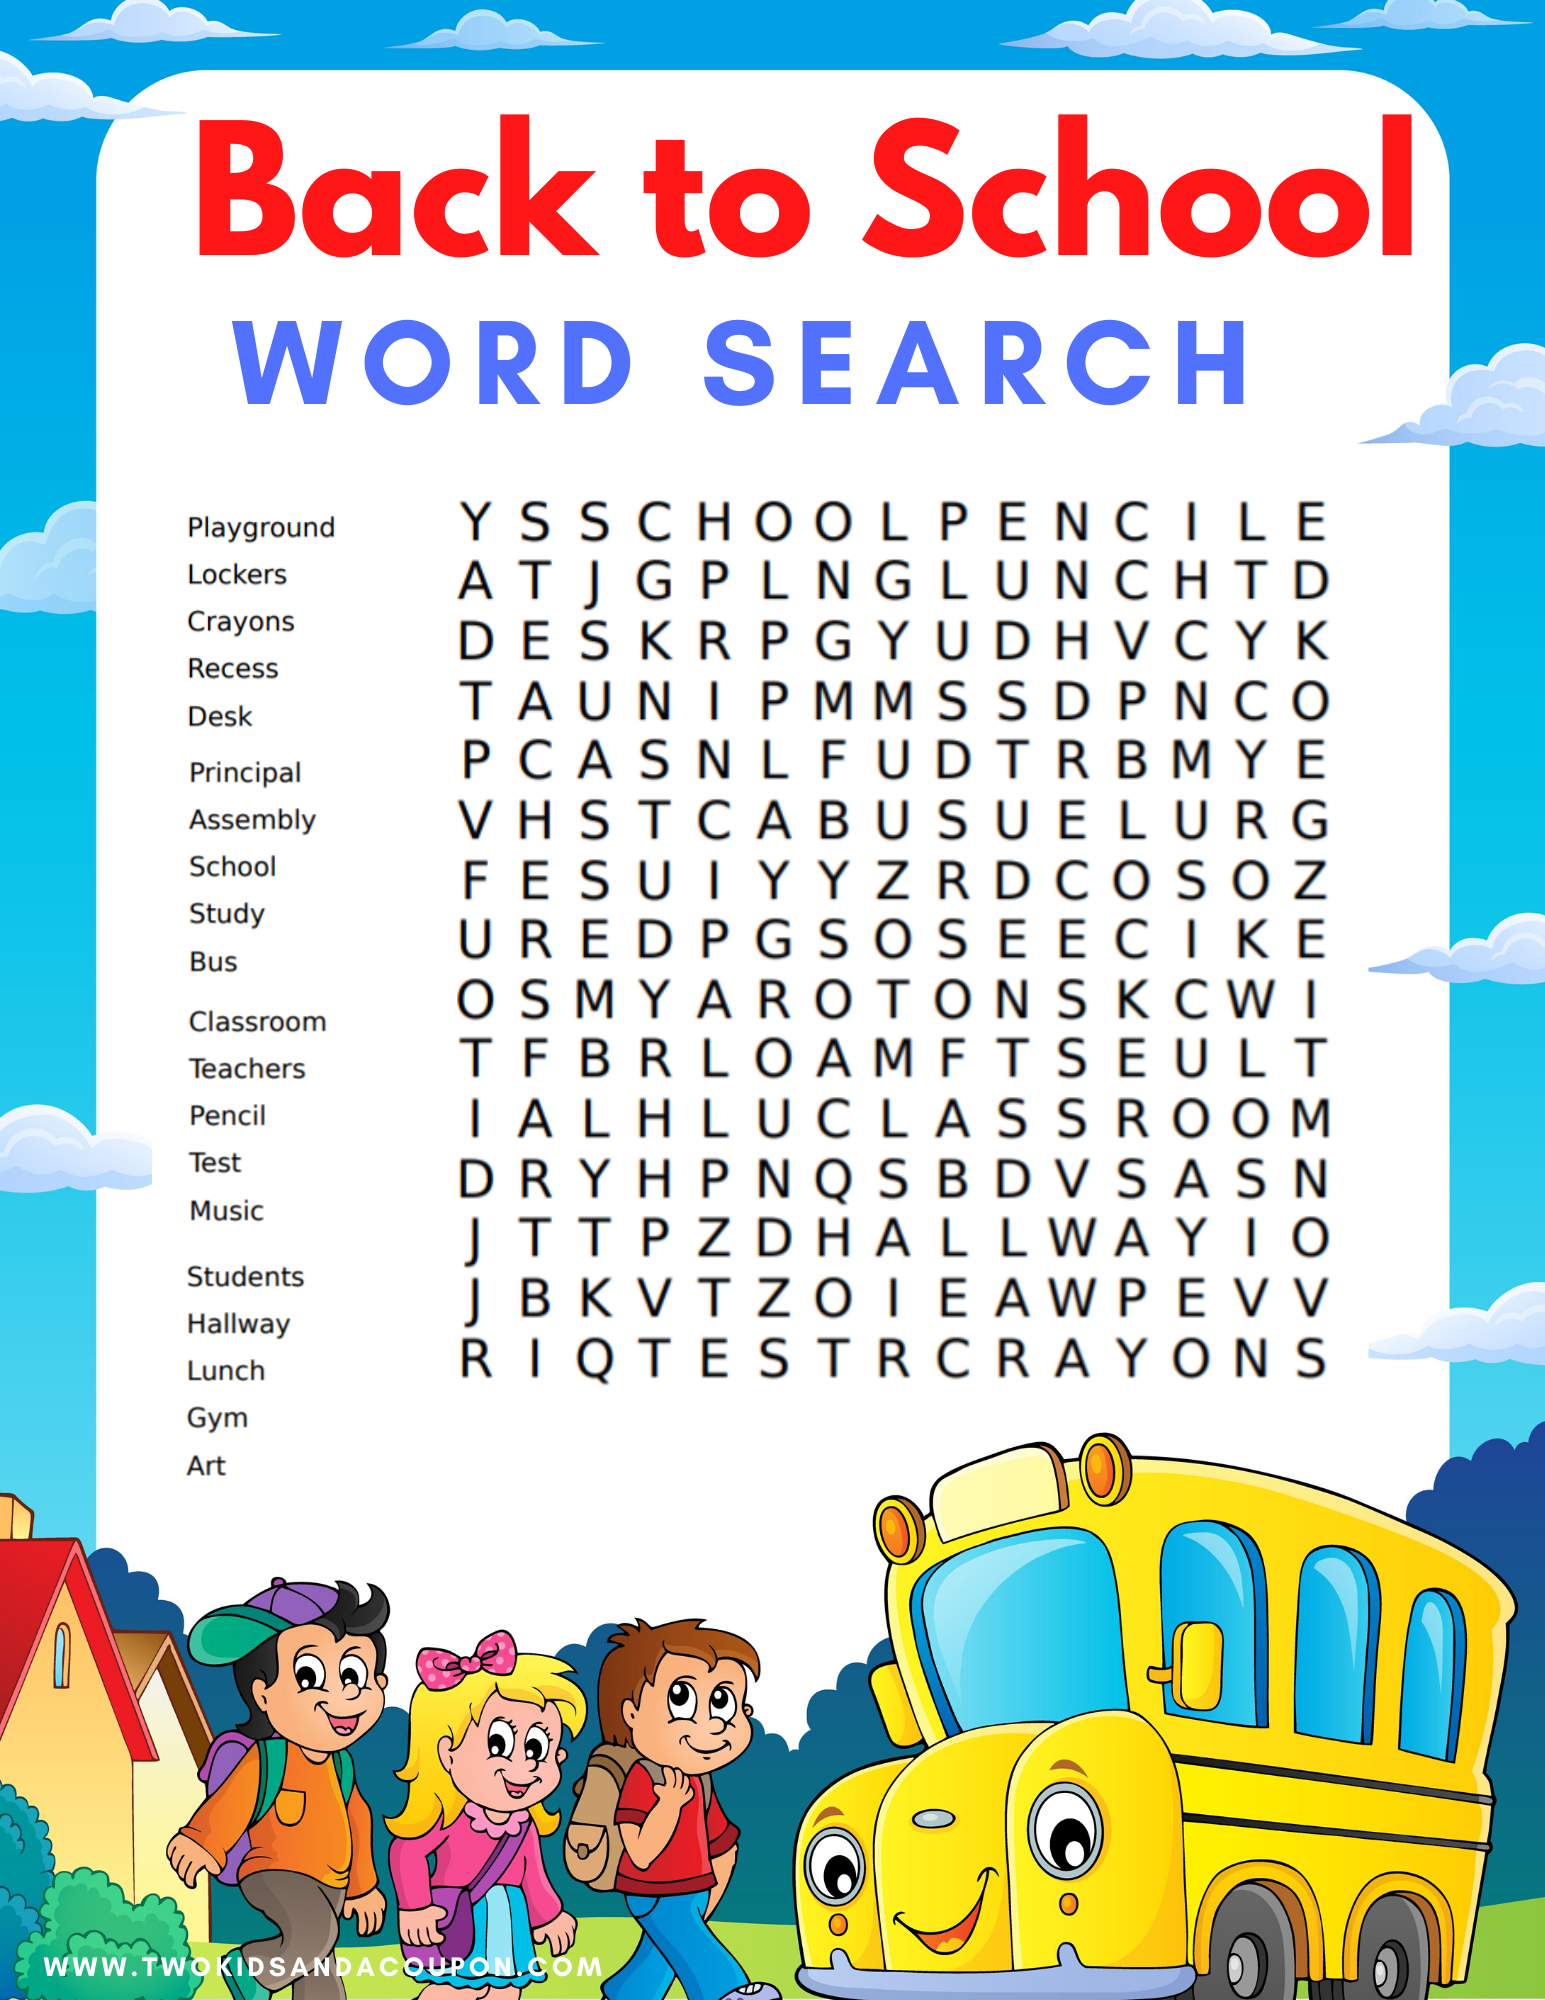 How To Find Words In A Word Search Quickly